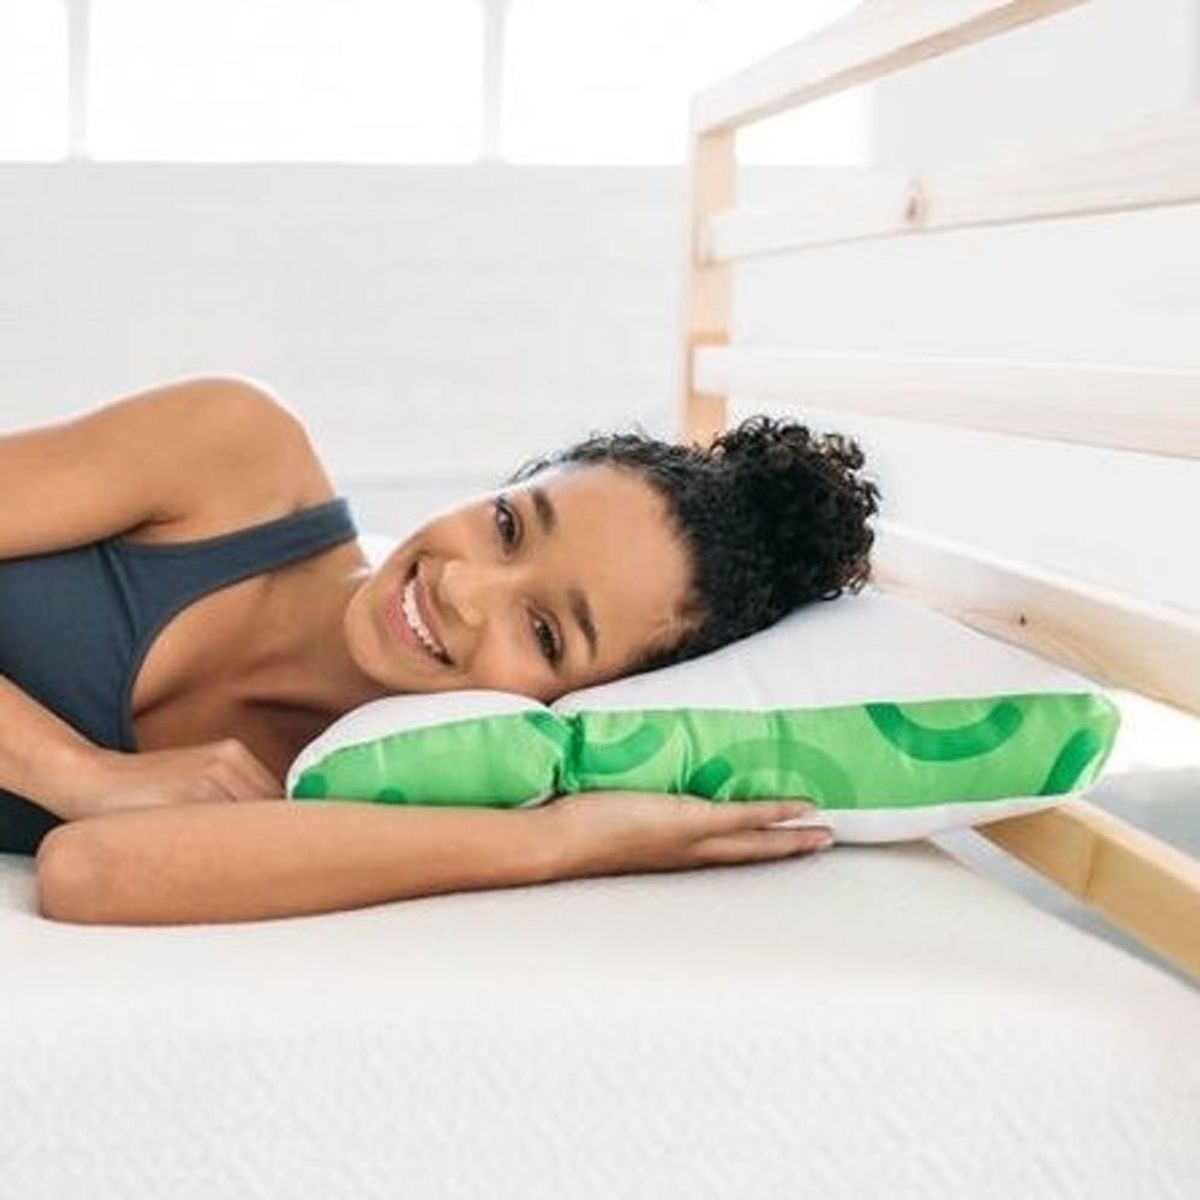 These Pillows Help You Do Yoga in Your Sleep